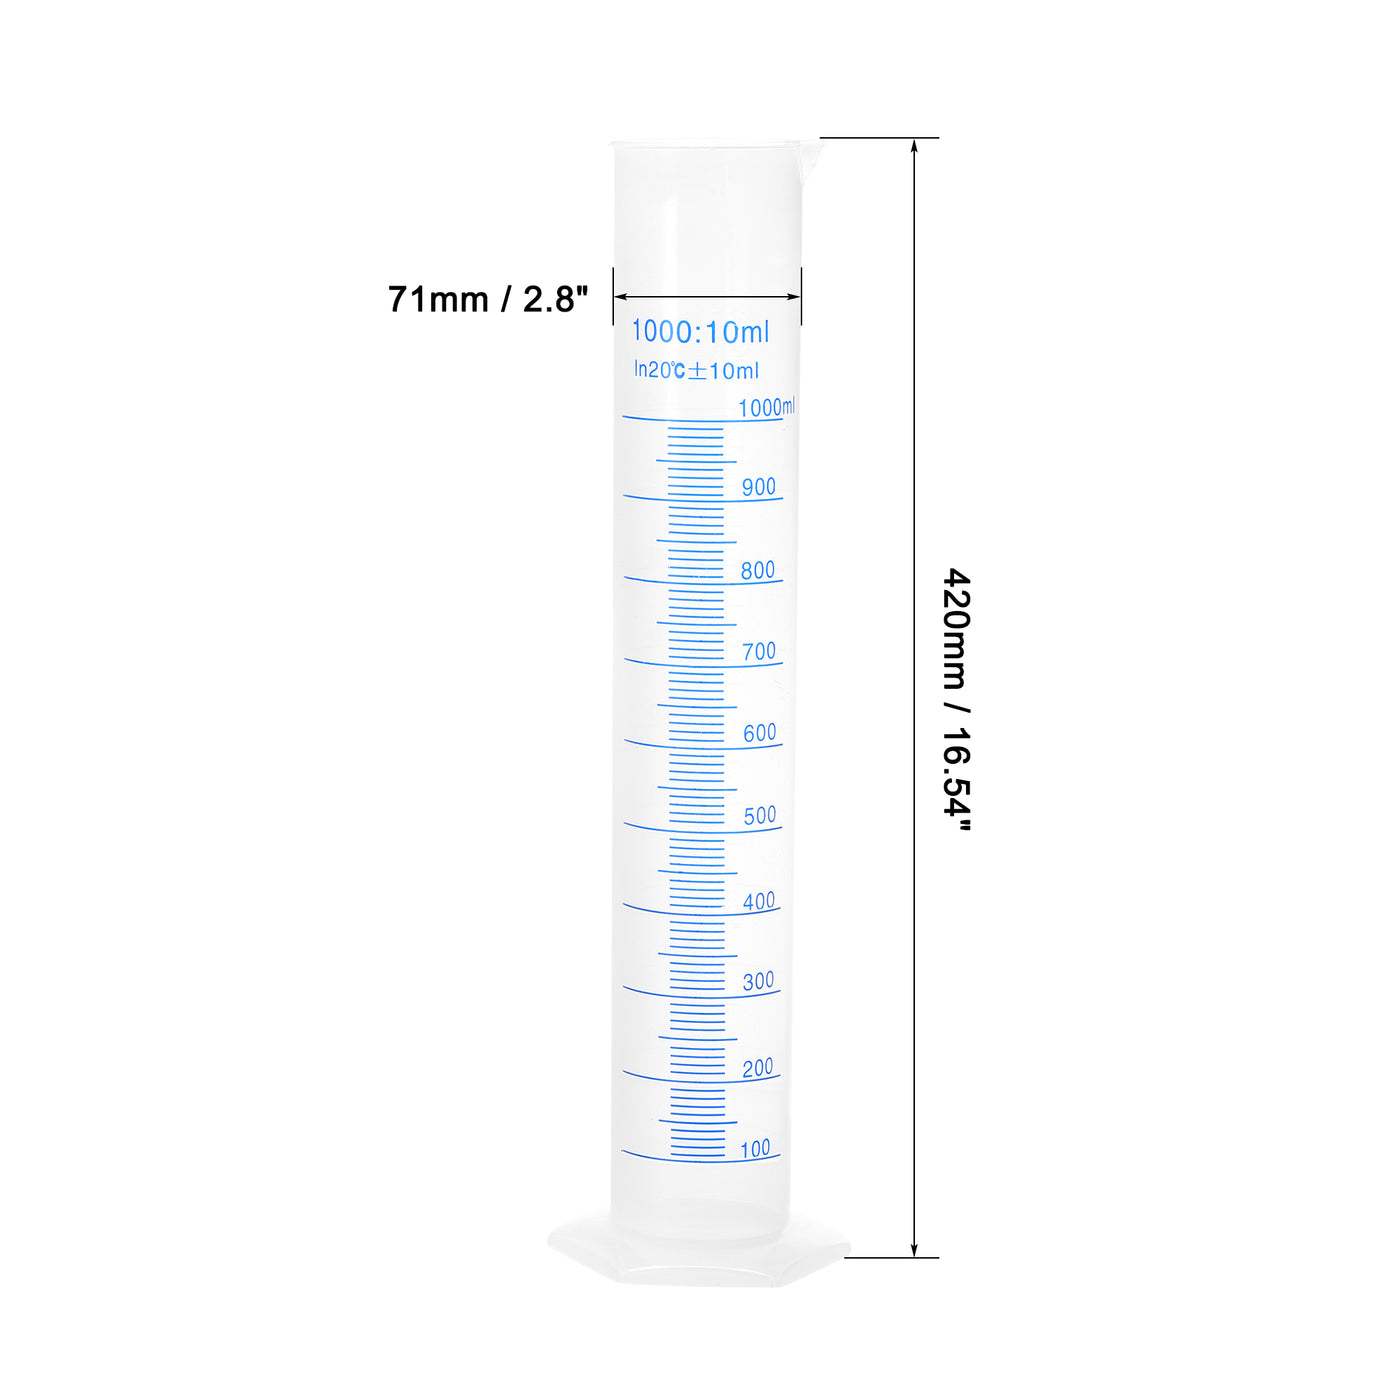 uxcell Uxcell Plastic Graduated Cylinder, 1000ml Measuring Cylinder, 2-Sided Metric Marking